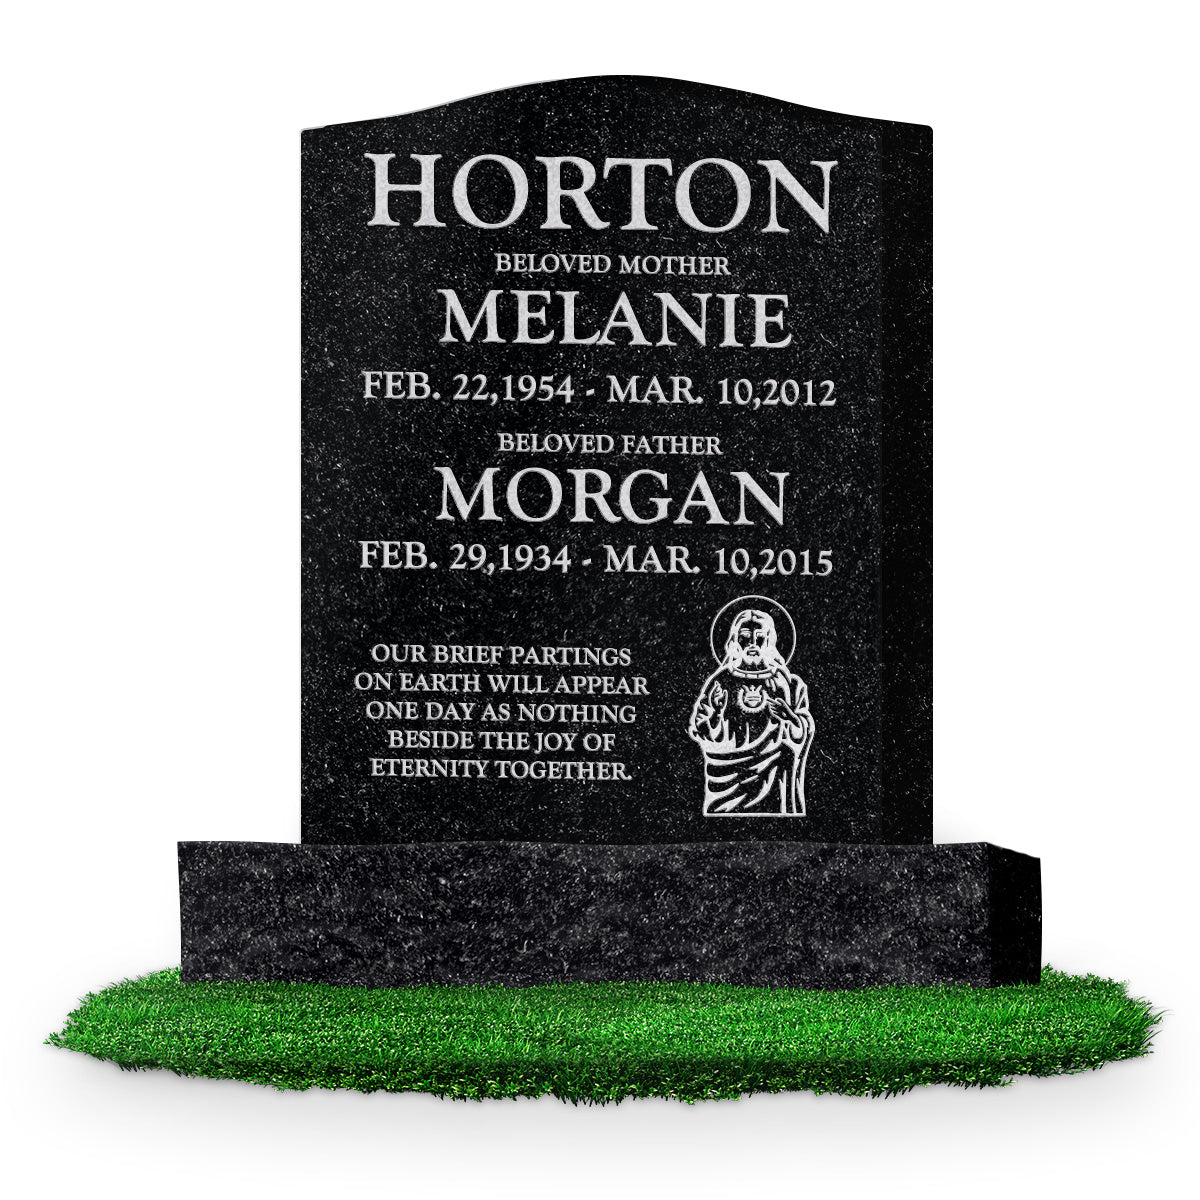 18″ x 6″ x 24″ Serp Top Upright Headstone: polished top, front and back; 24″ base; Companion/Artwork